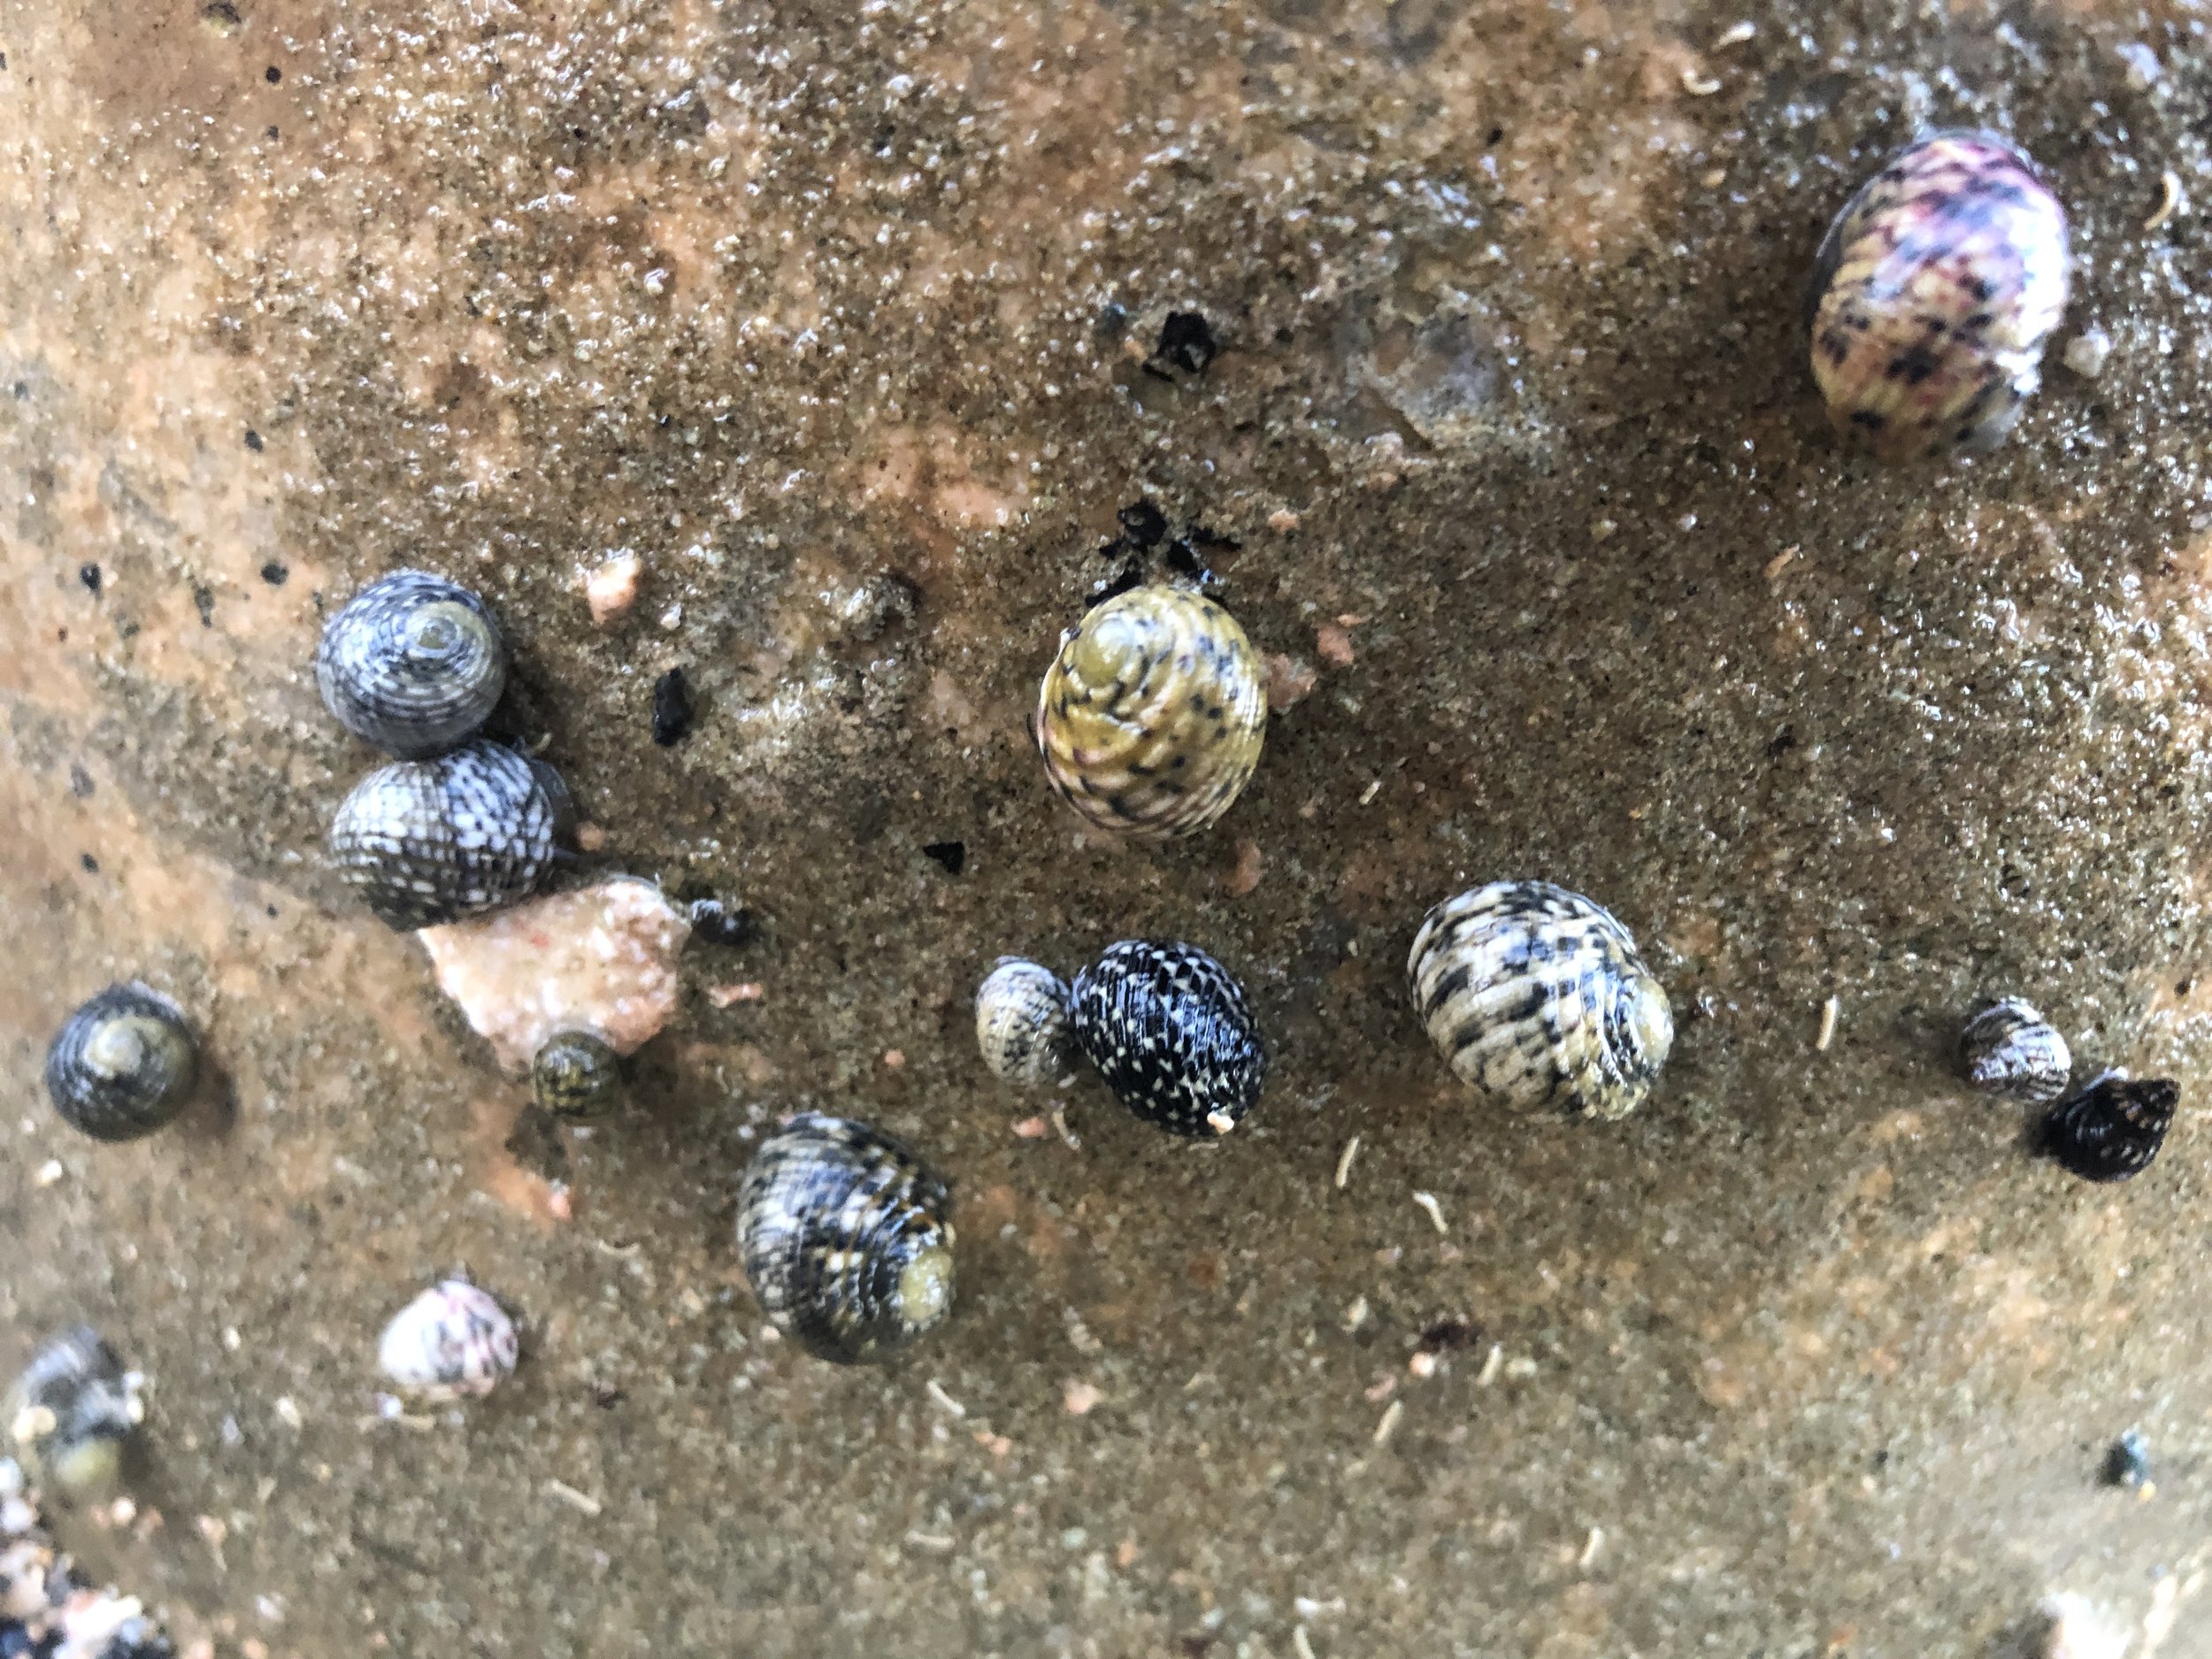 Snails of various colors clinging to a rock